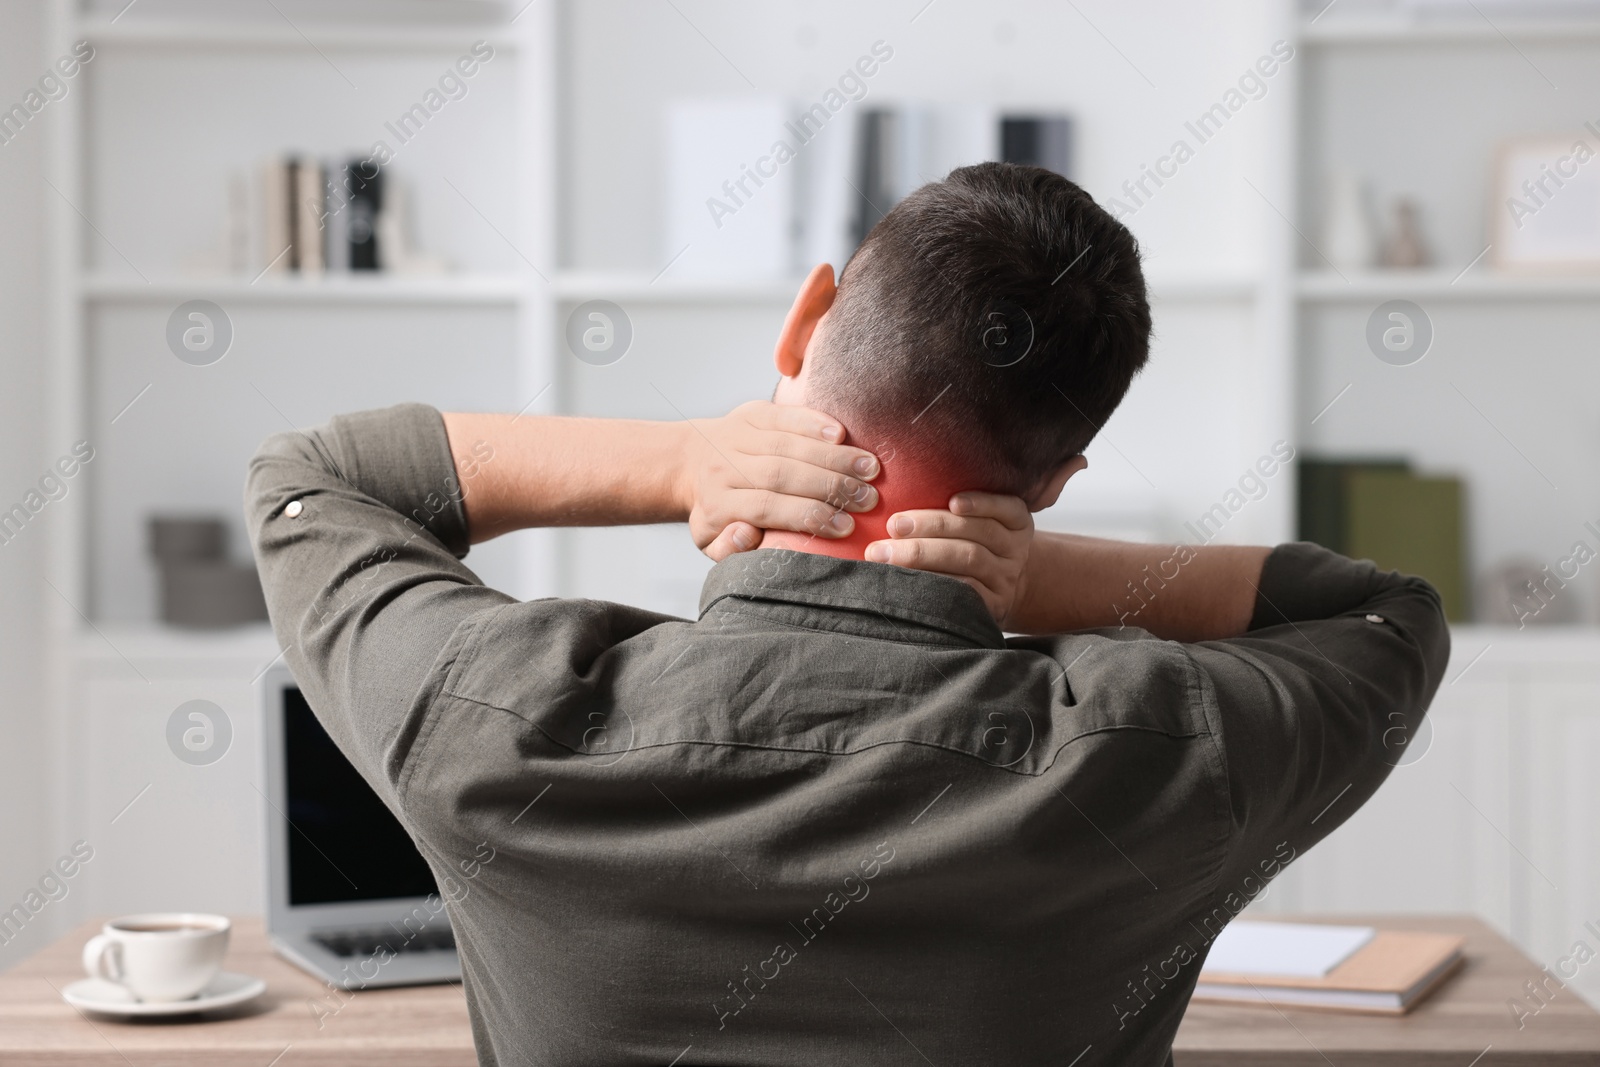 Image of Man suffering from neck pain at table, back view